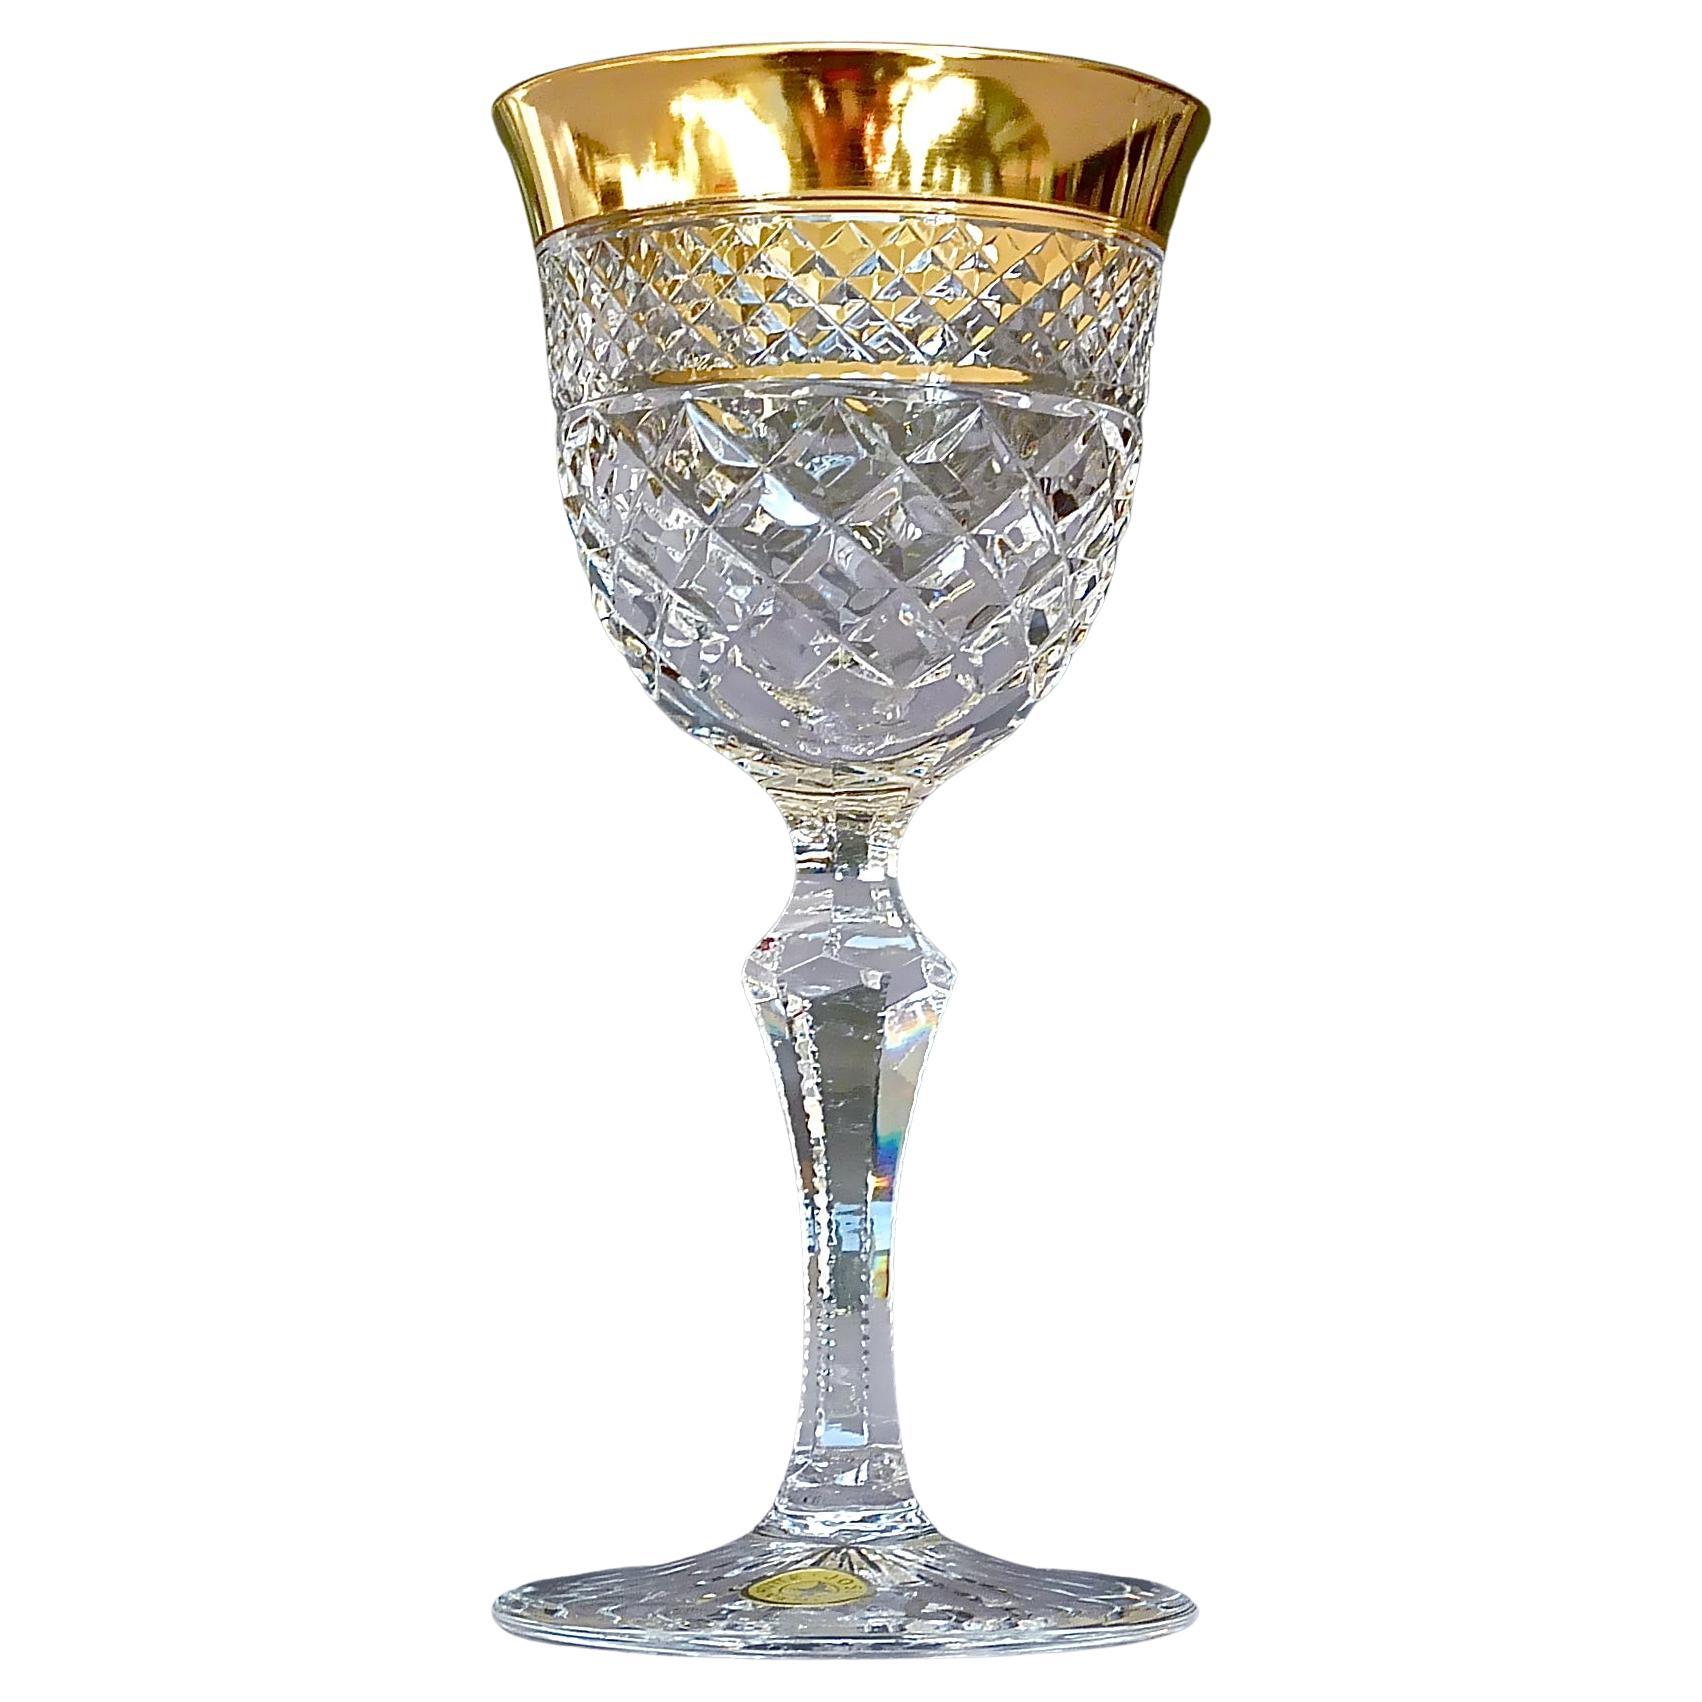 Gorgeous 20th century handcrafted faceted crystal glass set with 24-carat gold rim made by Josephinenhütte Moser circa 1960-1970 and very in the style of the exclusive French company Baccarat or Saint Louis thistle. This exquisite set of 6 dessert